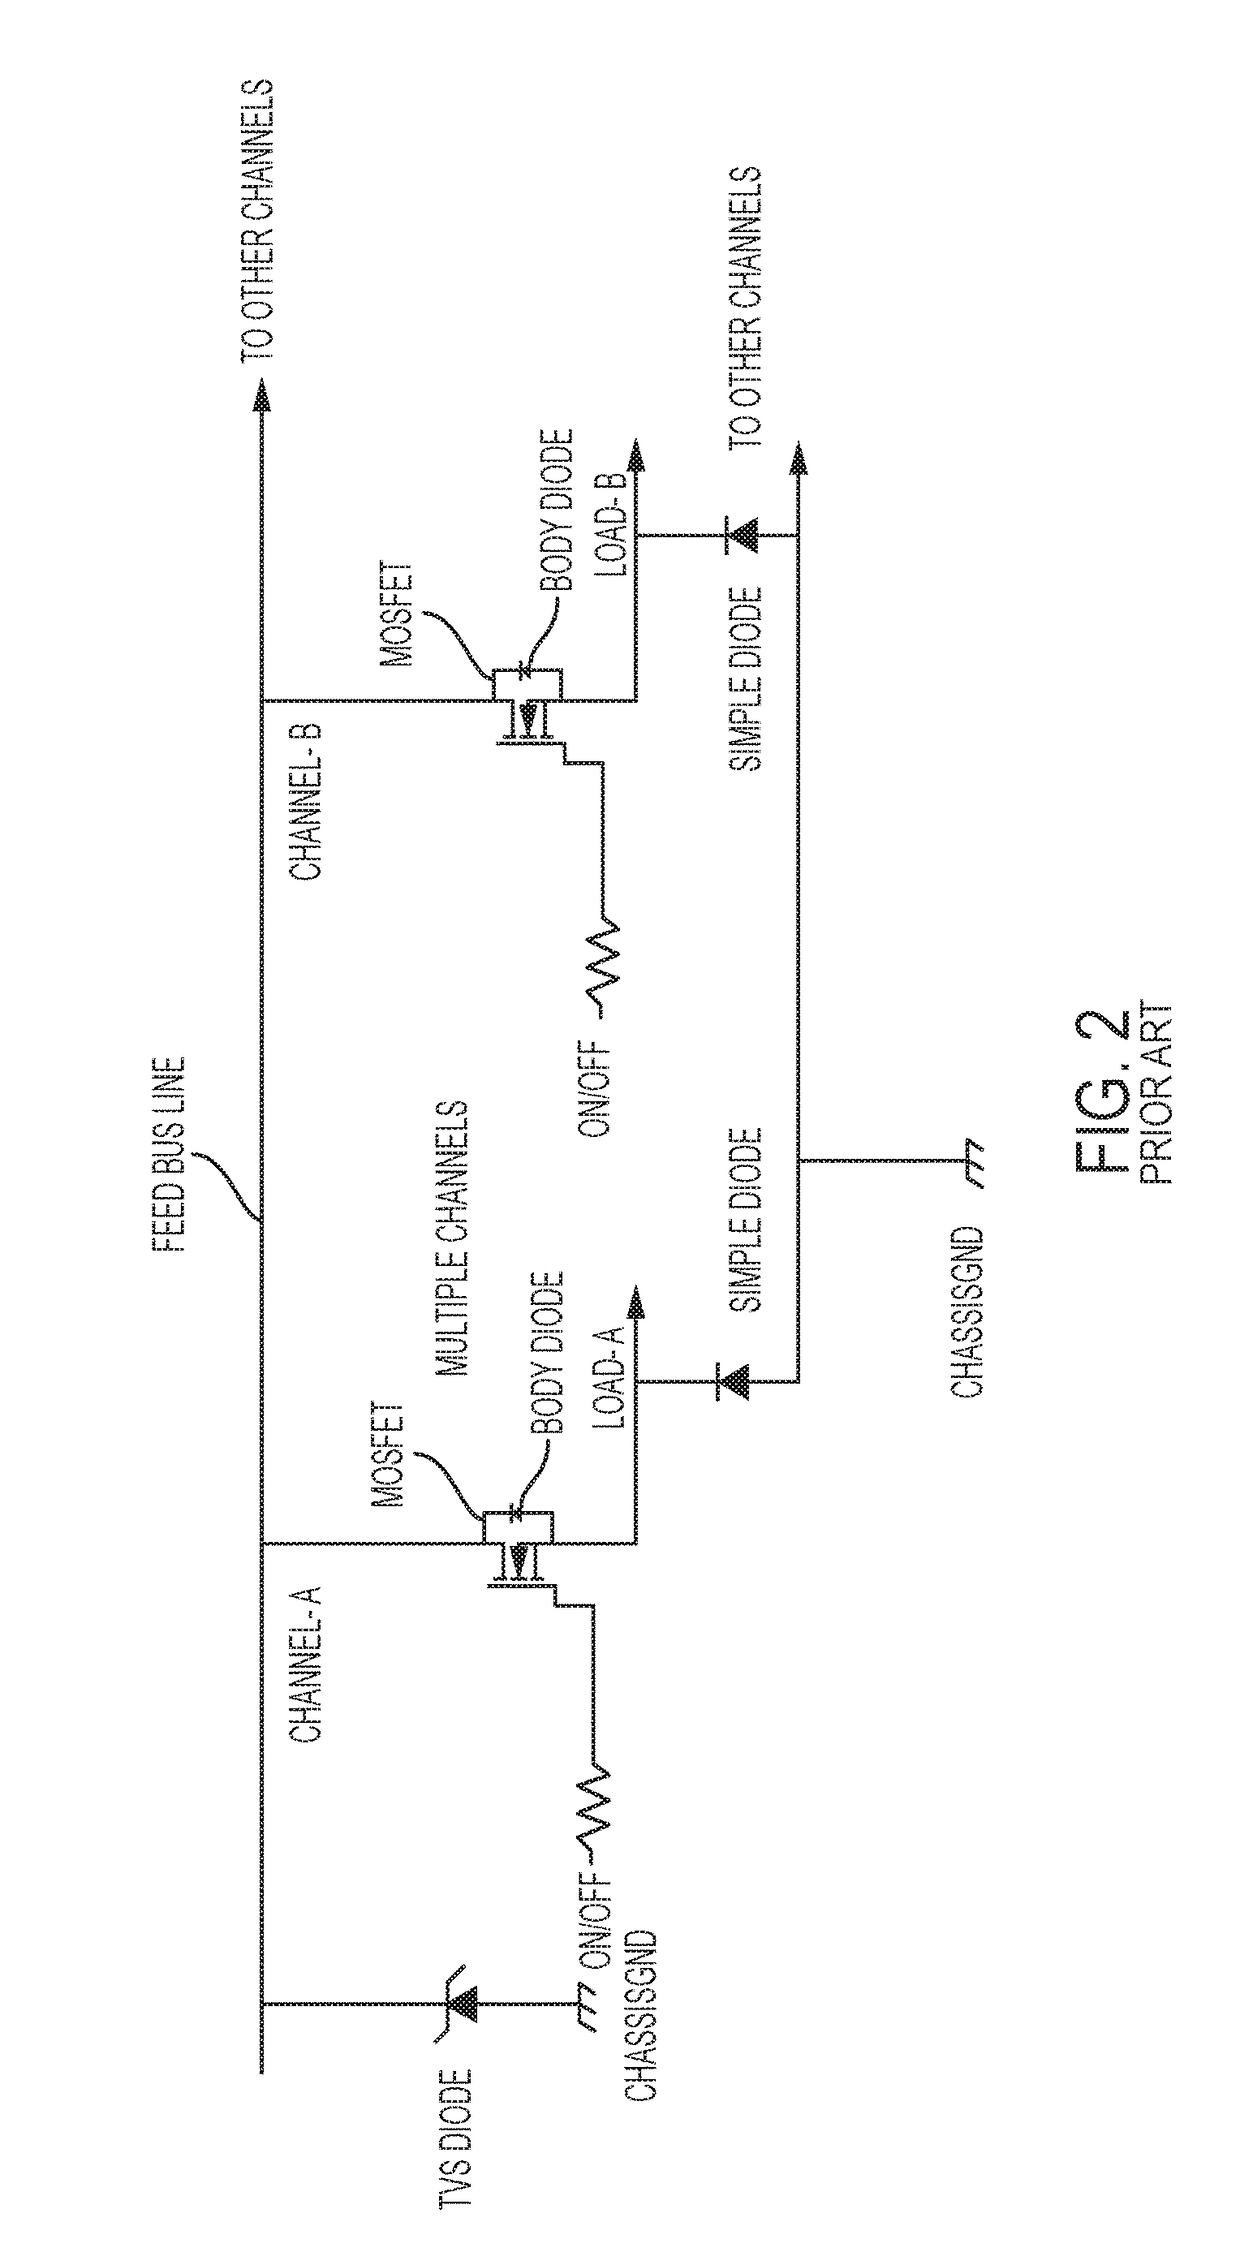 Transient voltage suppressor having built-in-test capability for solid state power controllers